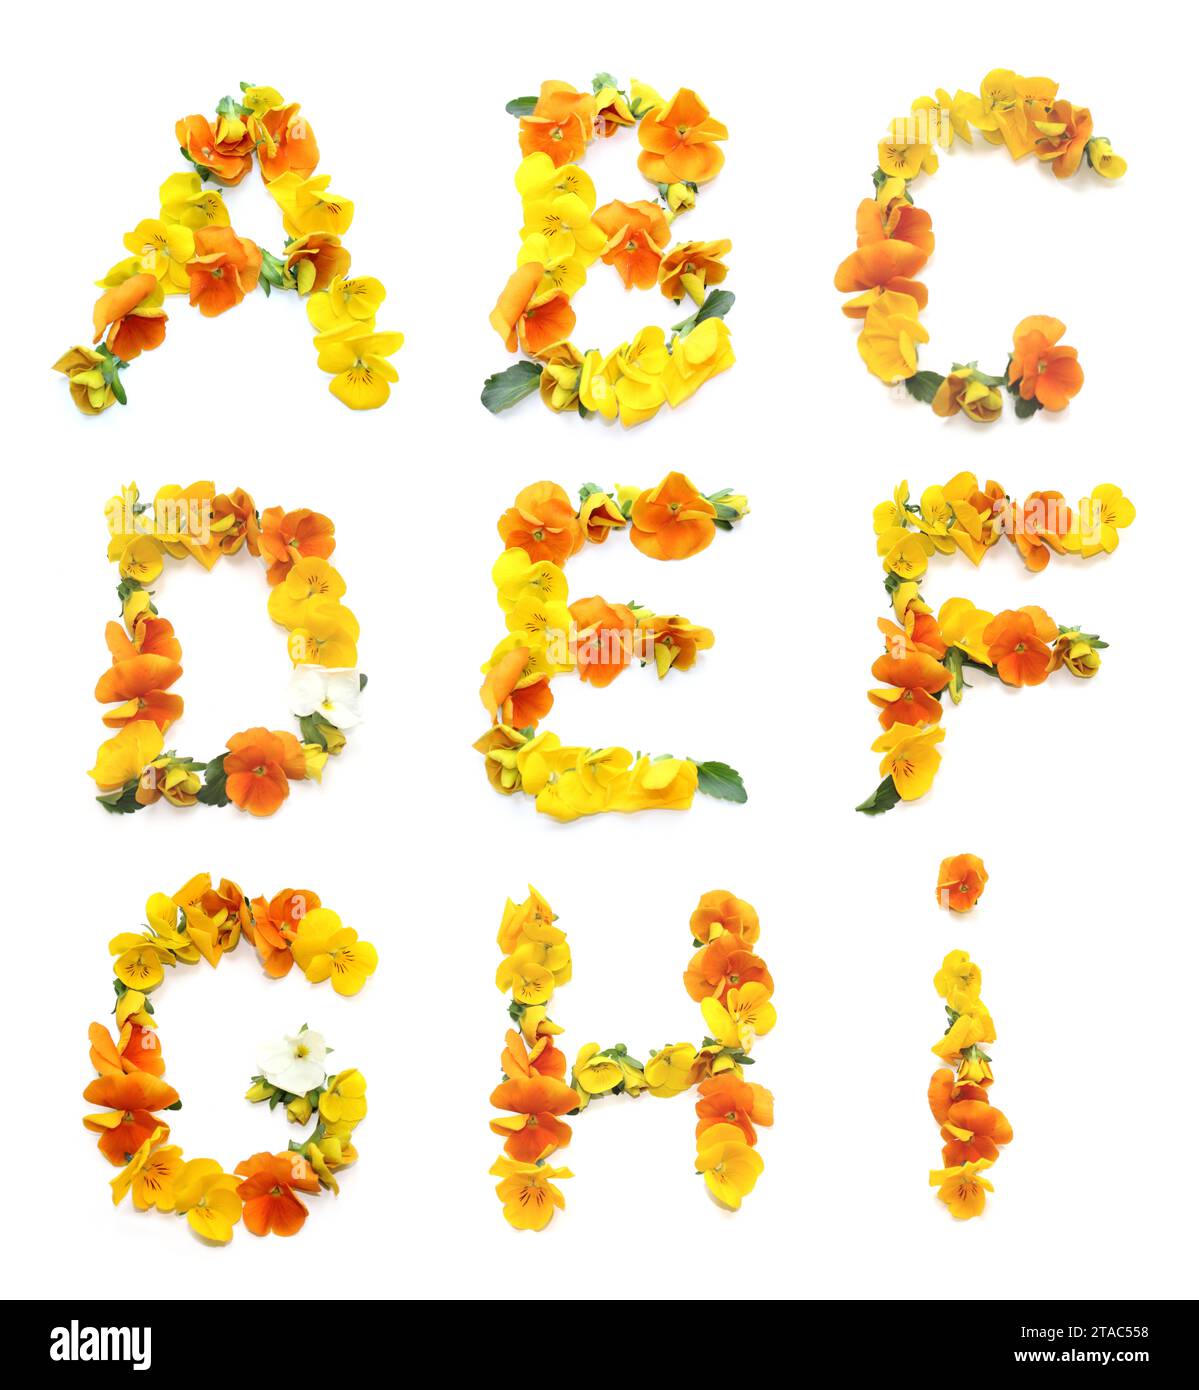 set of letters A B C D E F G made of yellow, orange flowers. The floral lettering can be used as posters for weddings, anniversaries, corporate events Stock Photo